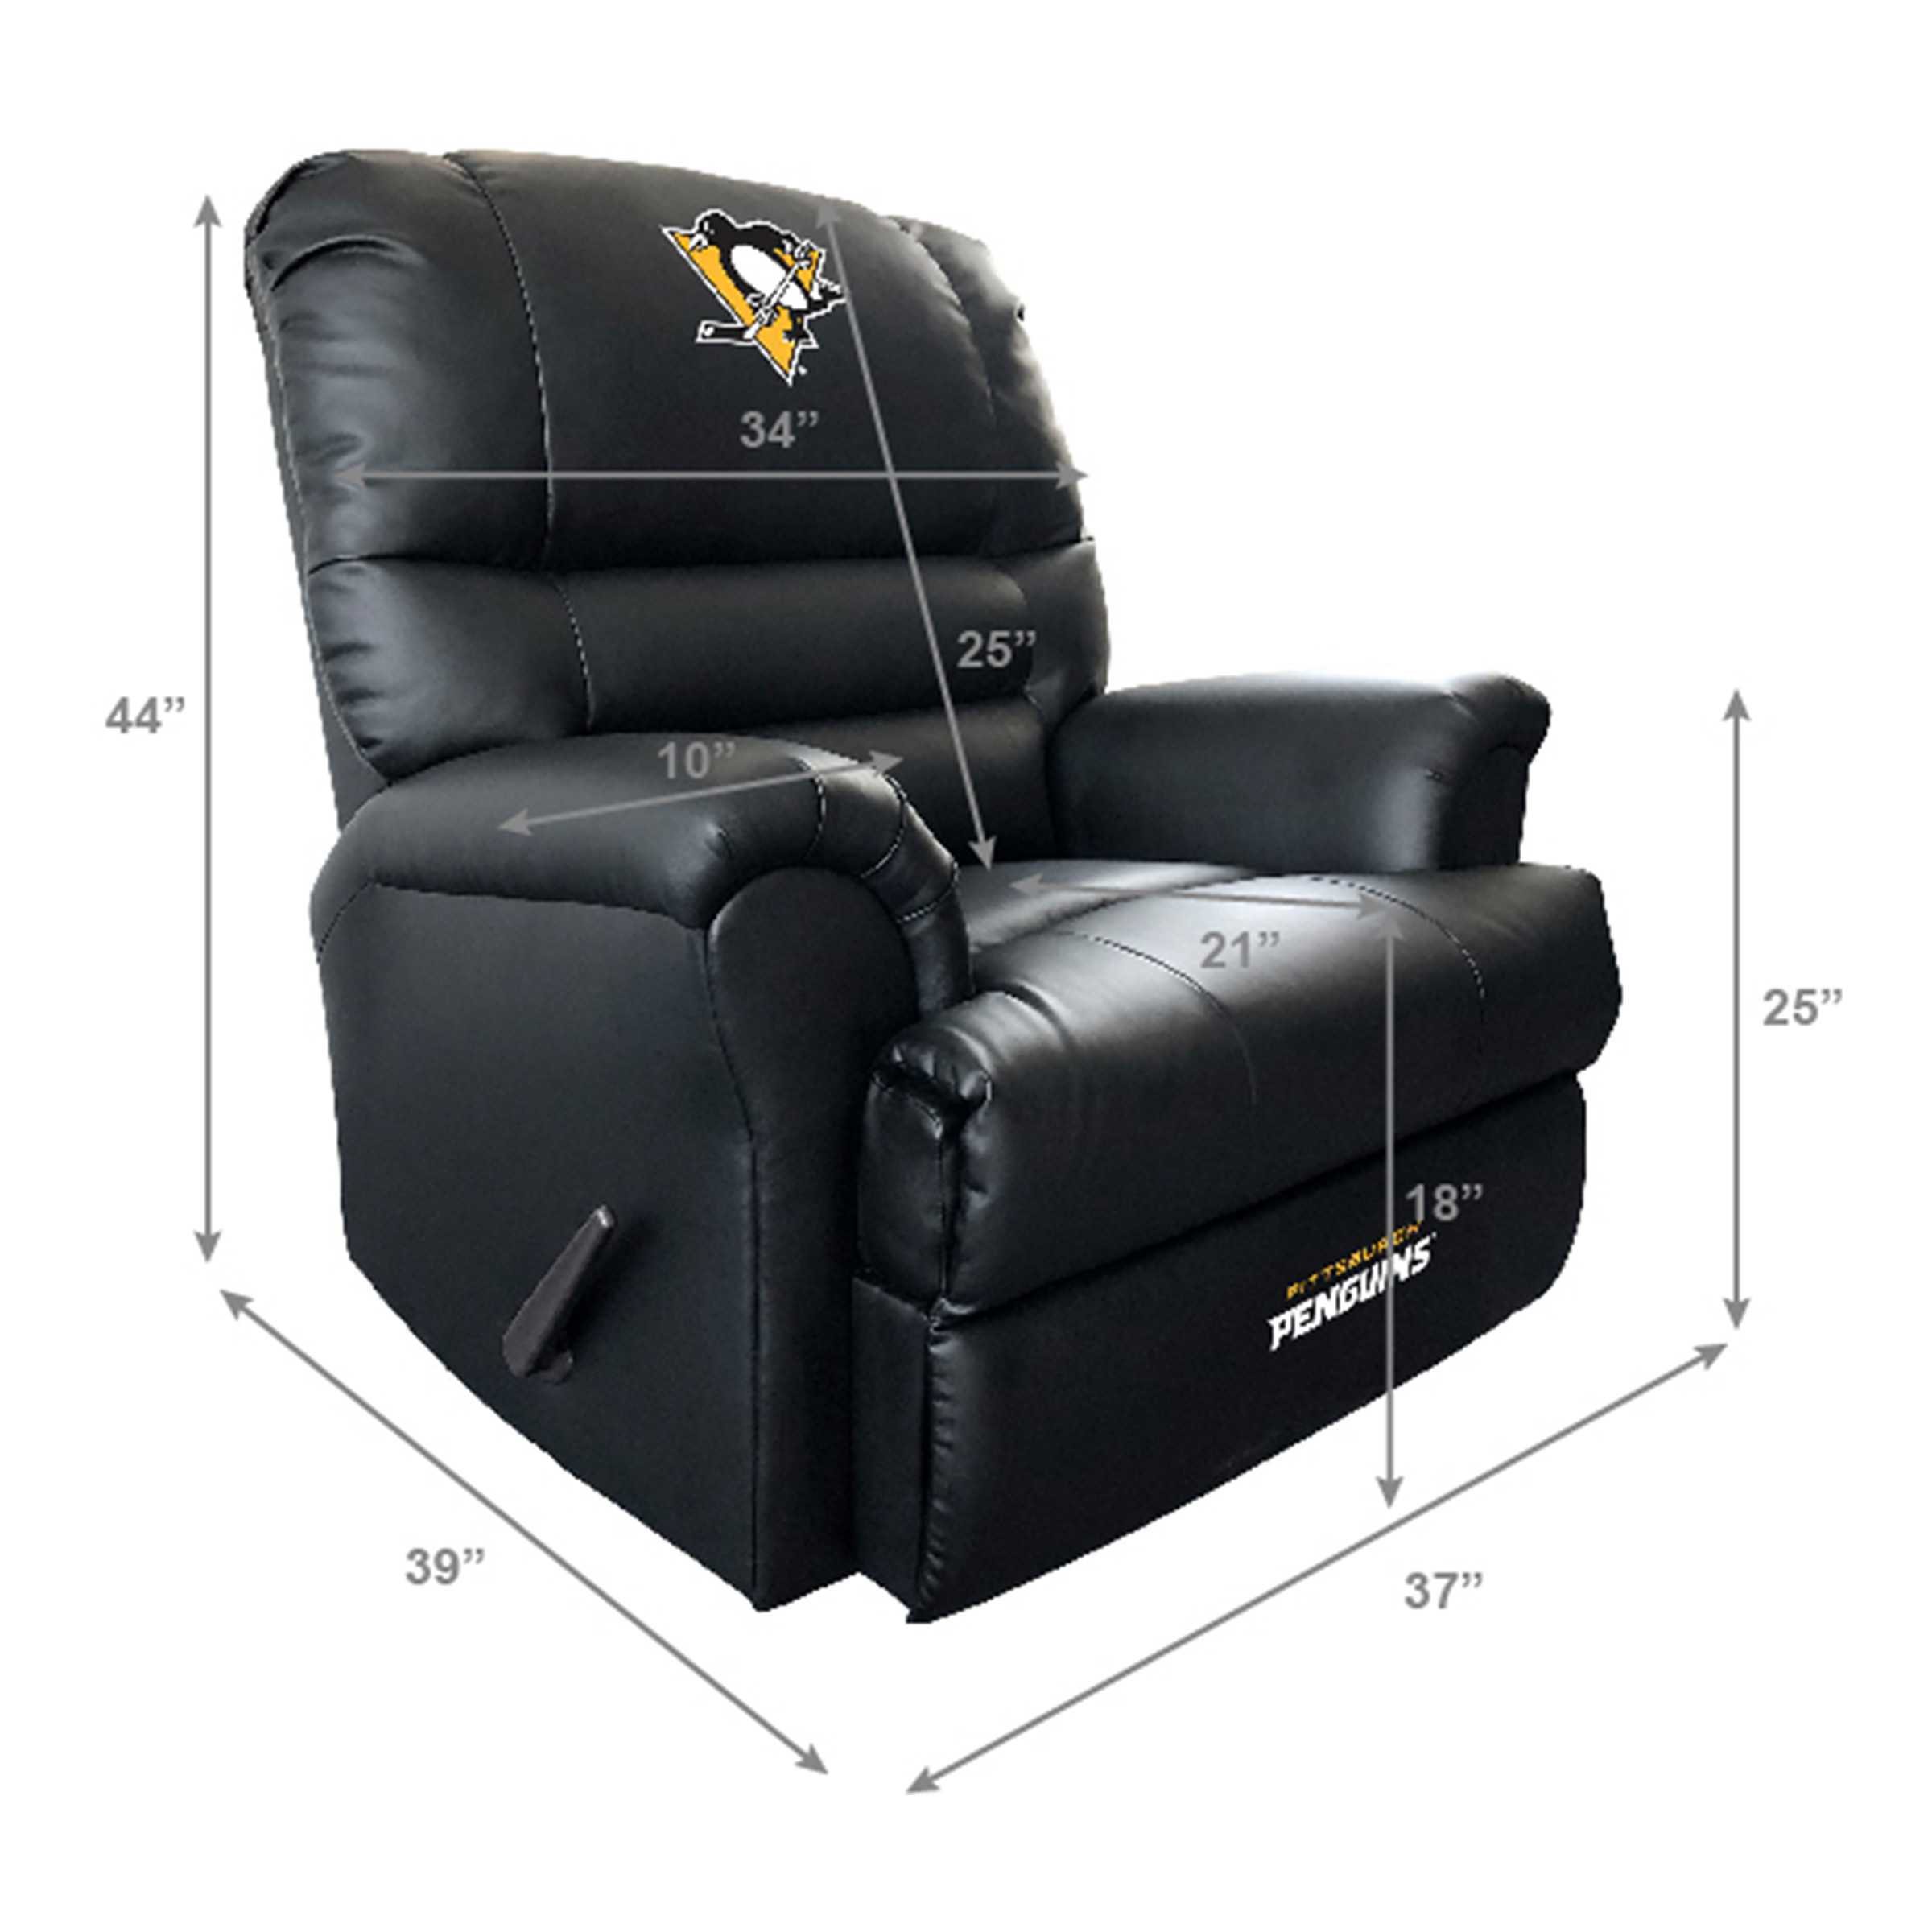 PITTSBURGH PENGUINS SPORTS RECLINER